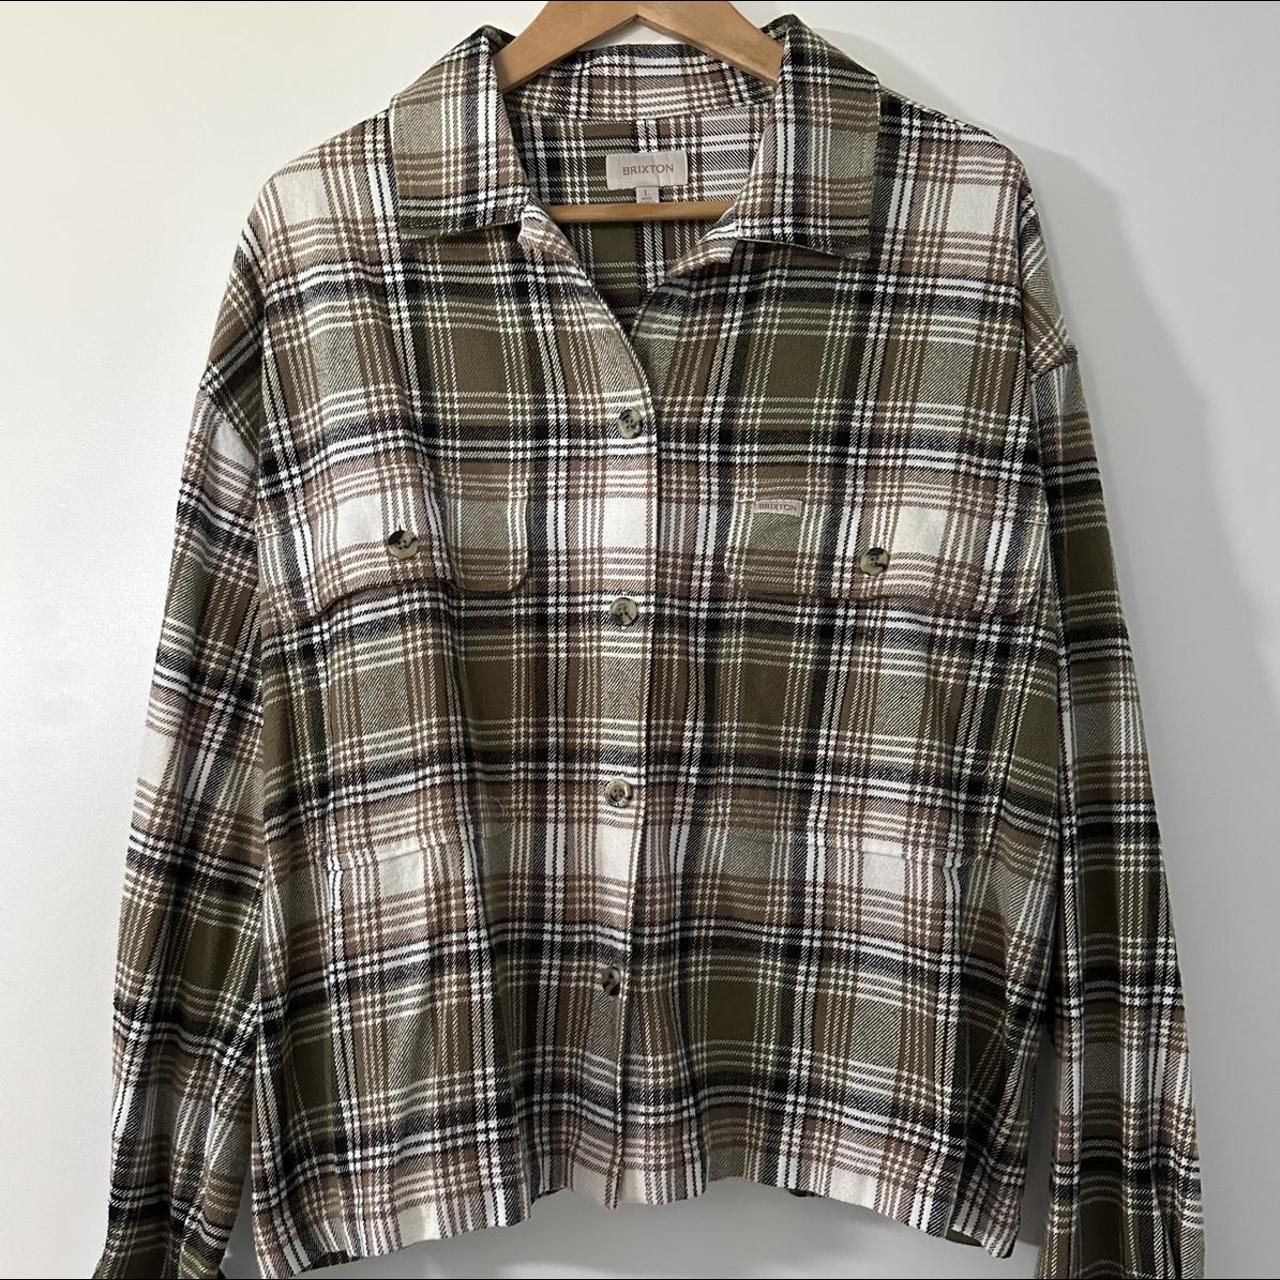 L | Brixton cropped checked shacket - Depop